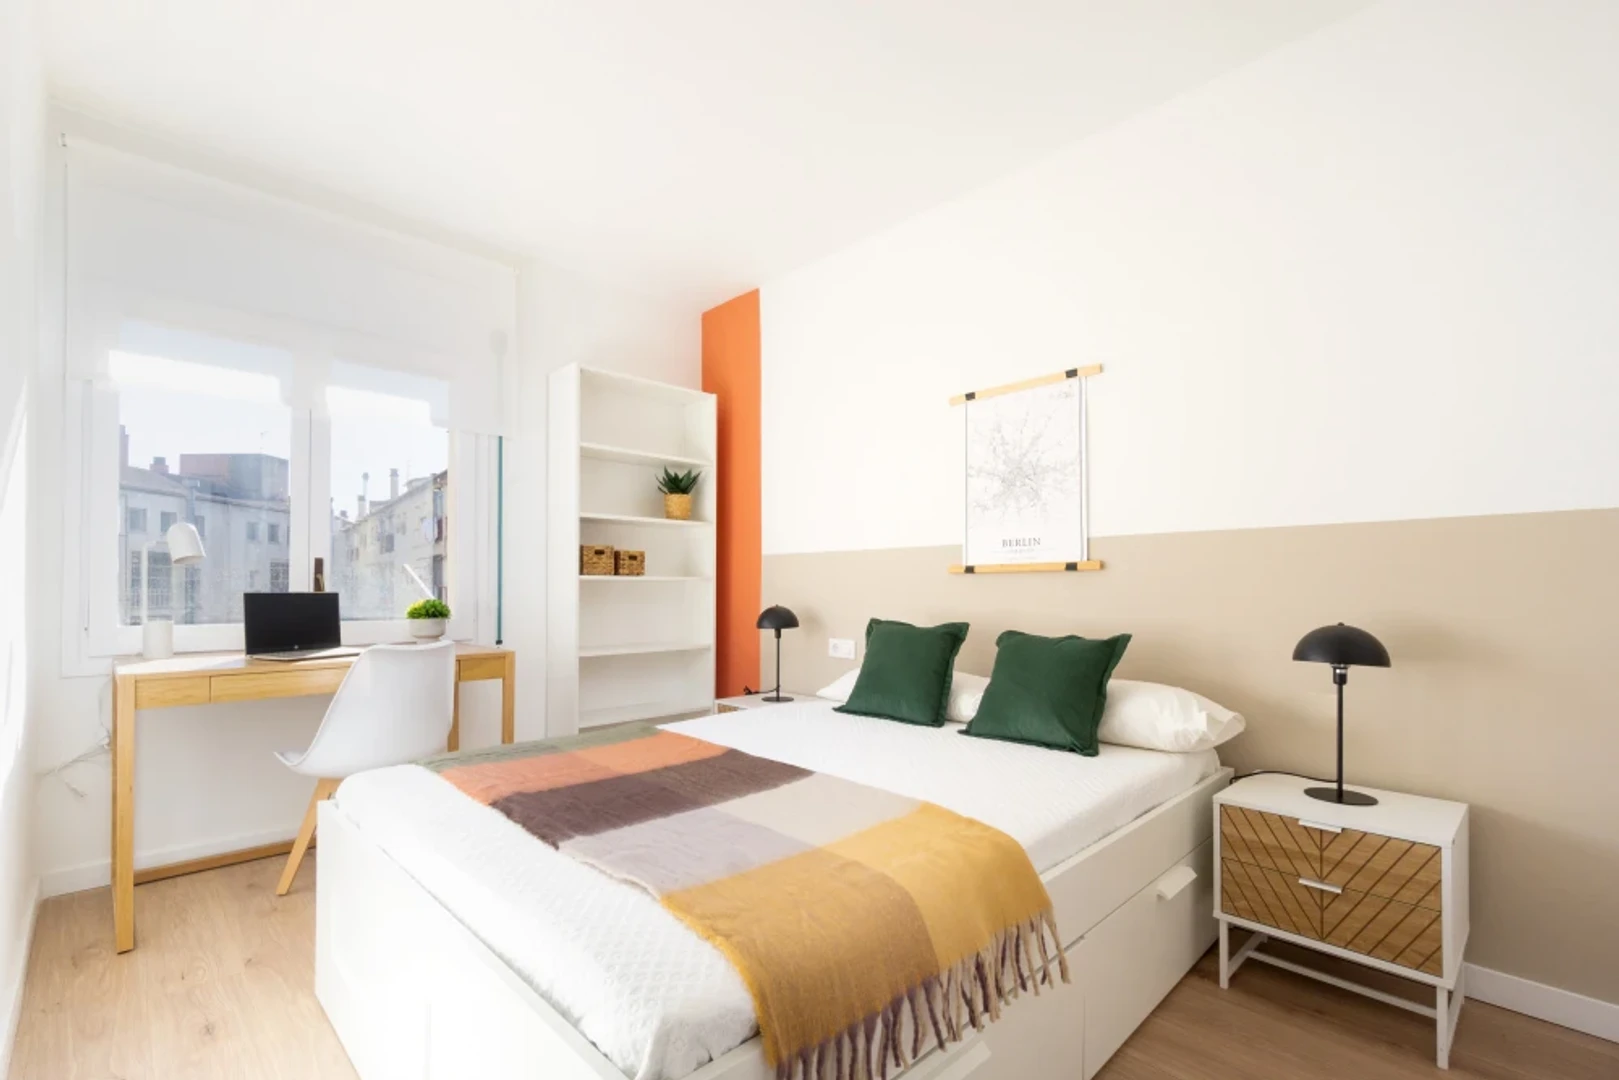 Room for rent with double bed girona